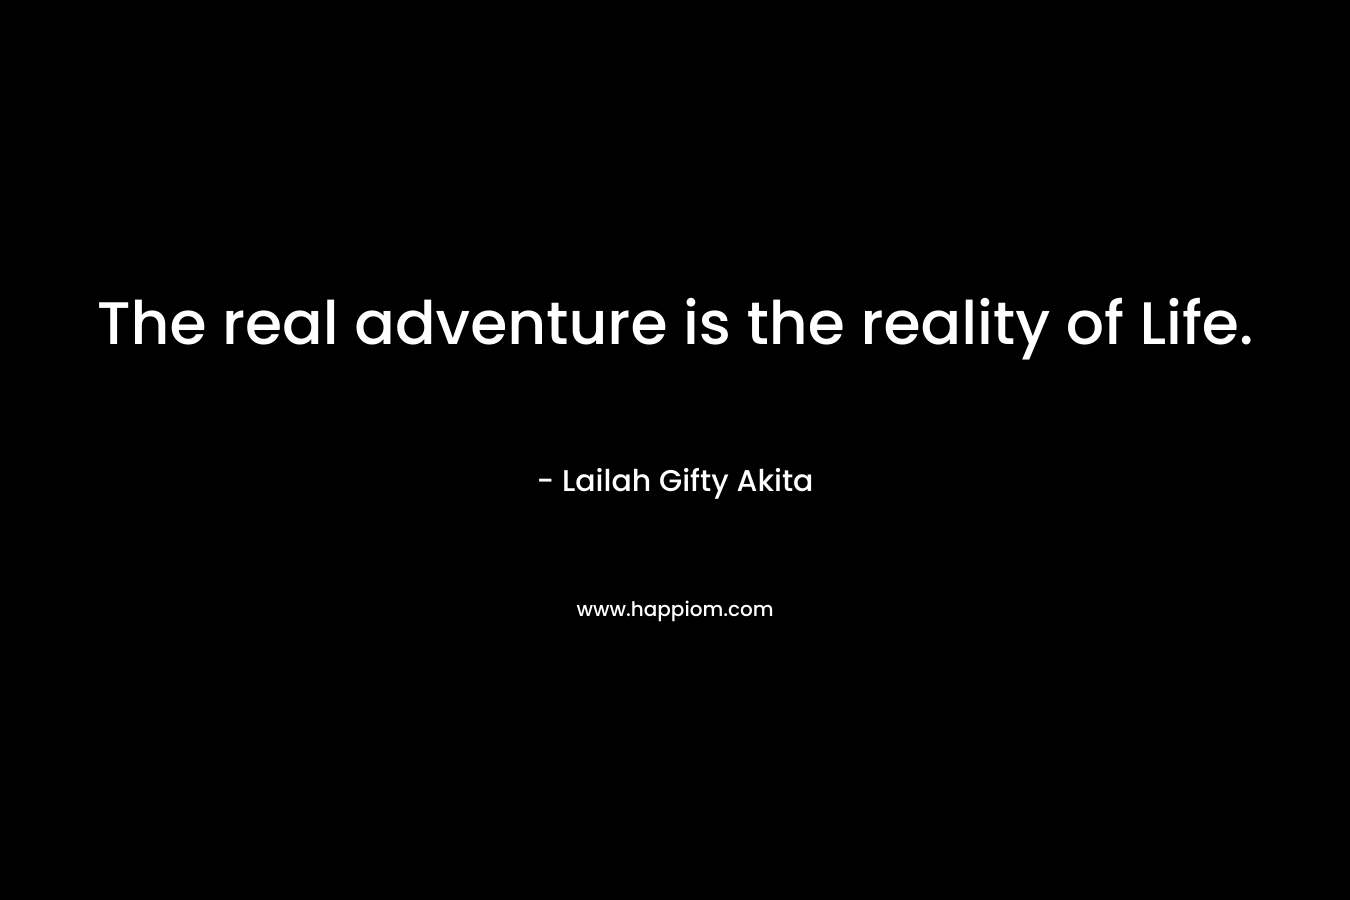 The real adventure is the reality of Life.